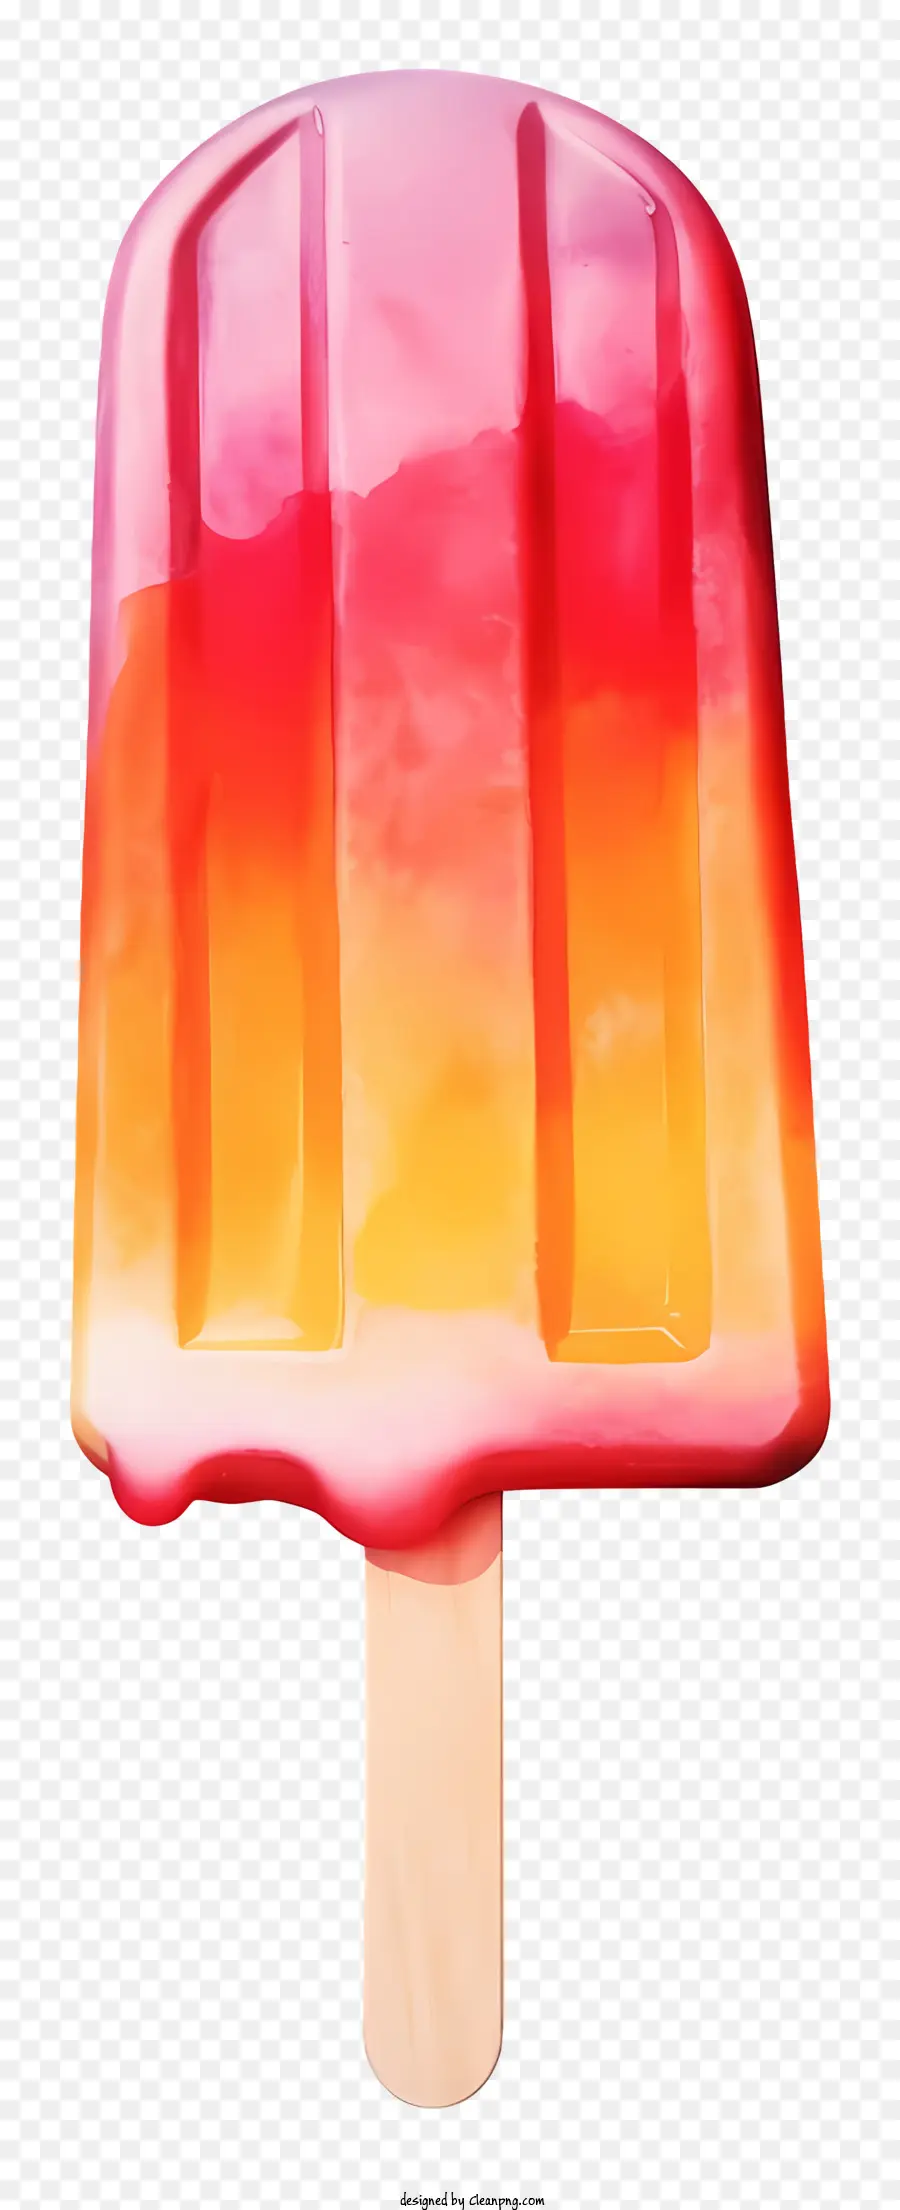 watermelon ice cream popsicle painting colorful artwork orange and pink color scheme warmth and nostalgia